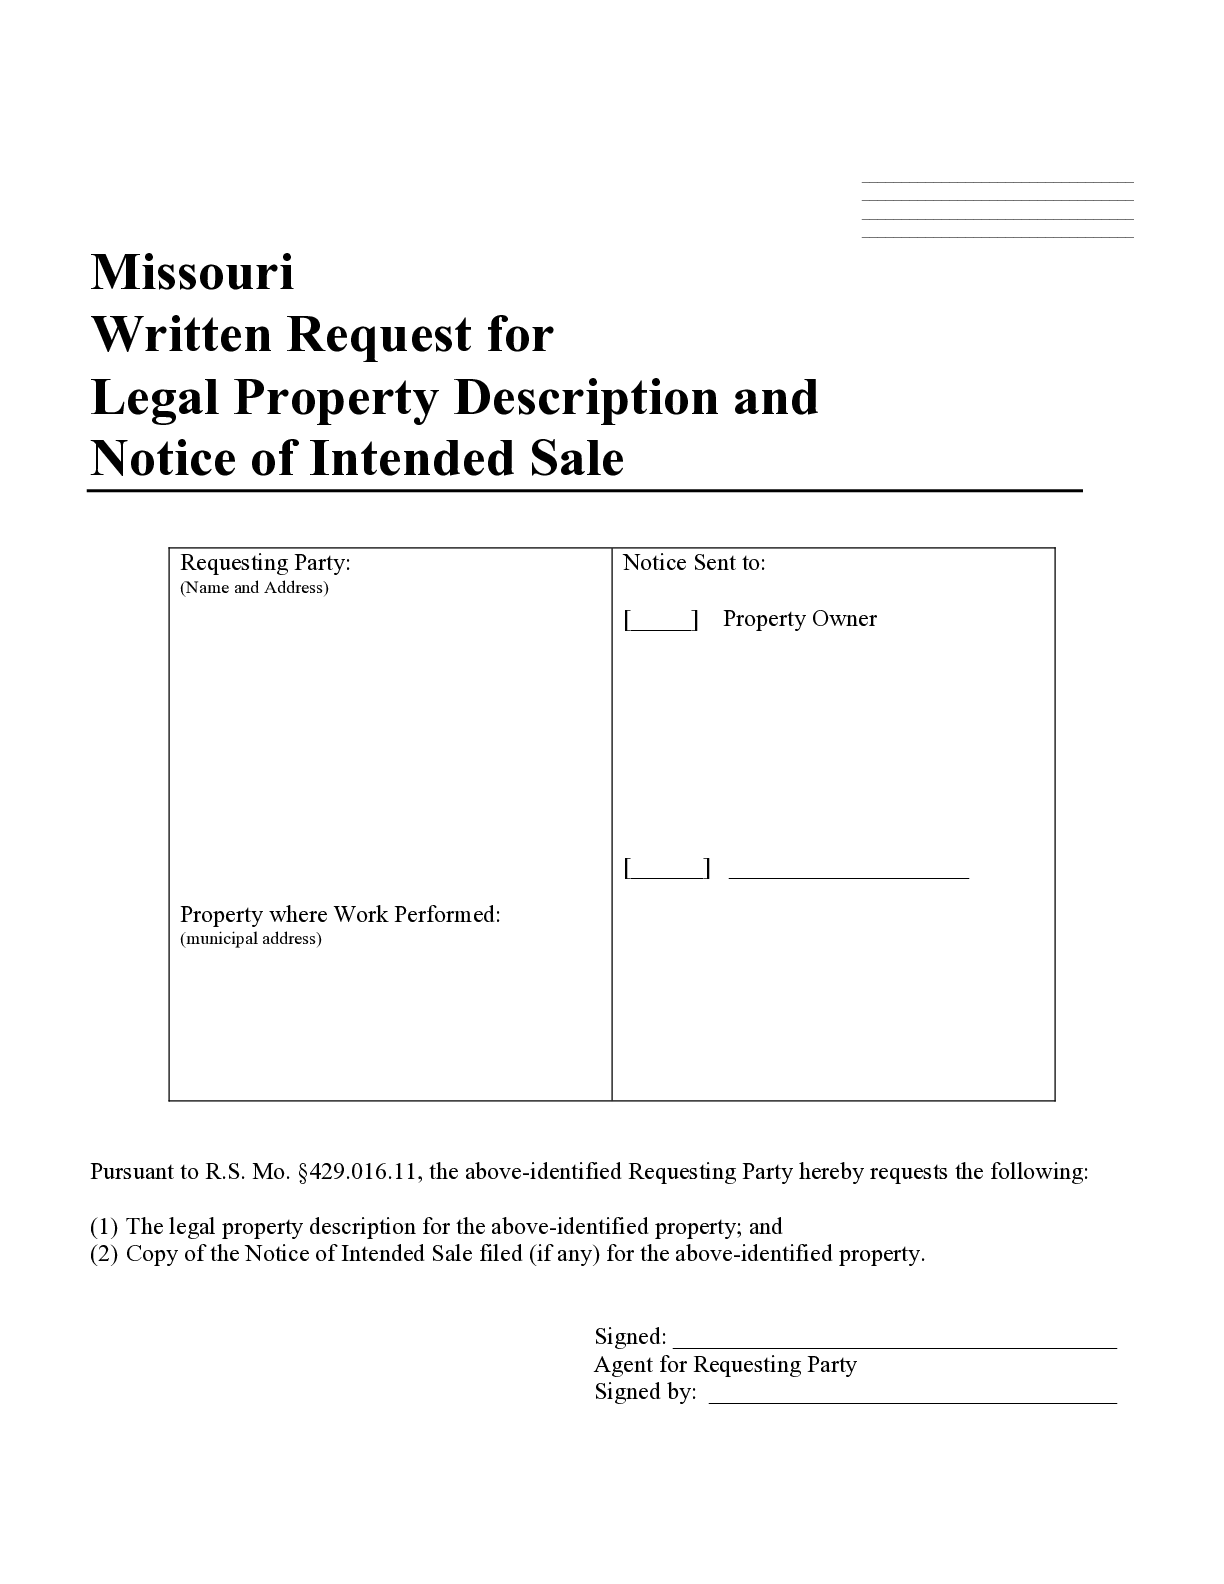 Missouri Request for Legal Property Description Form - free from